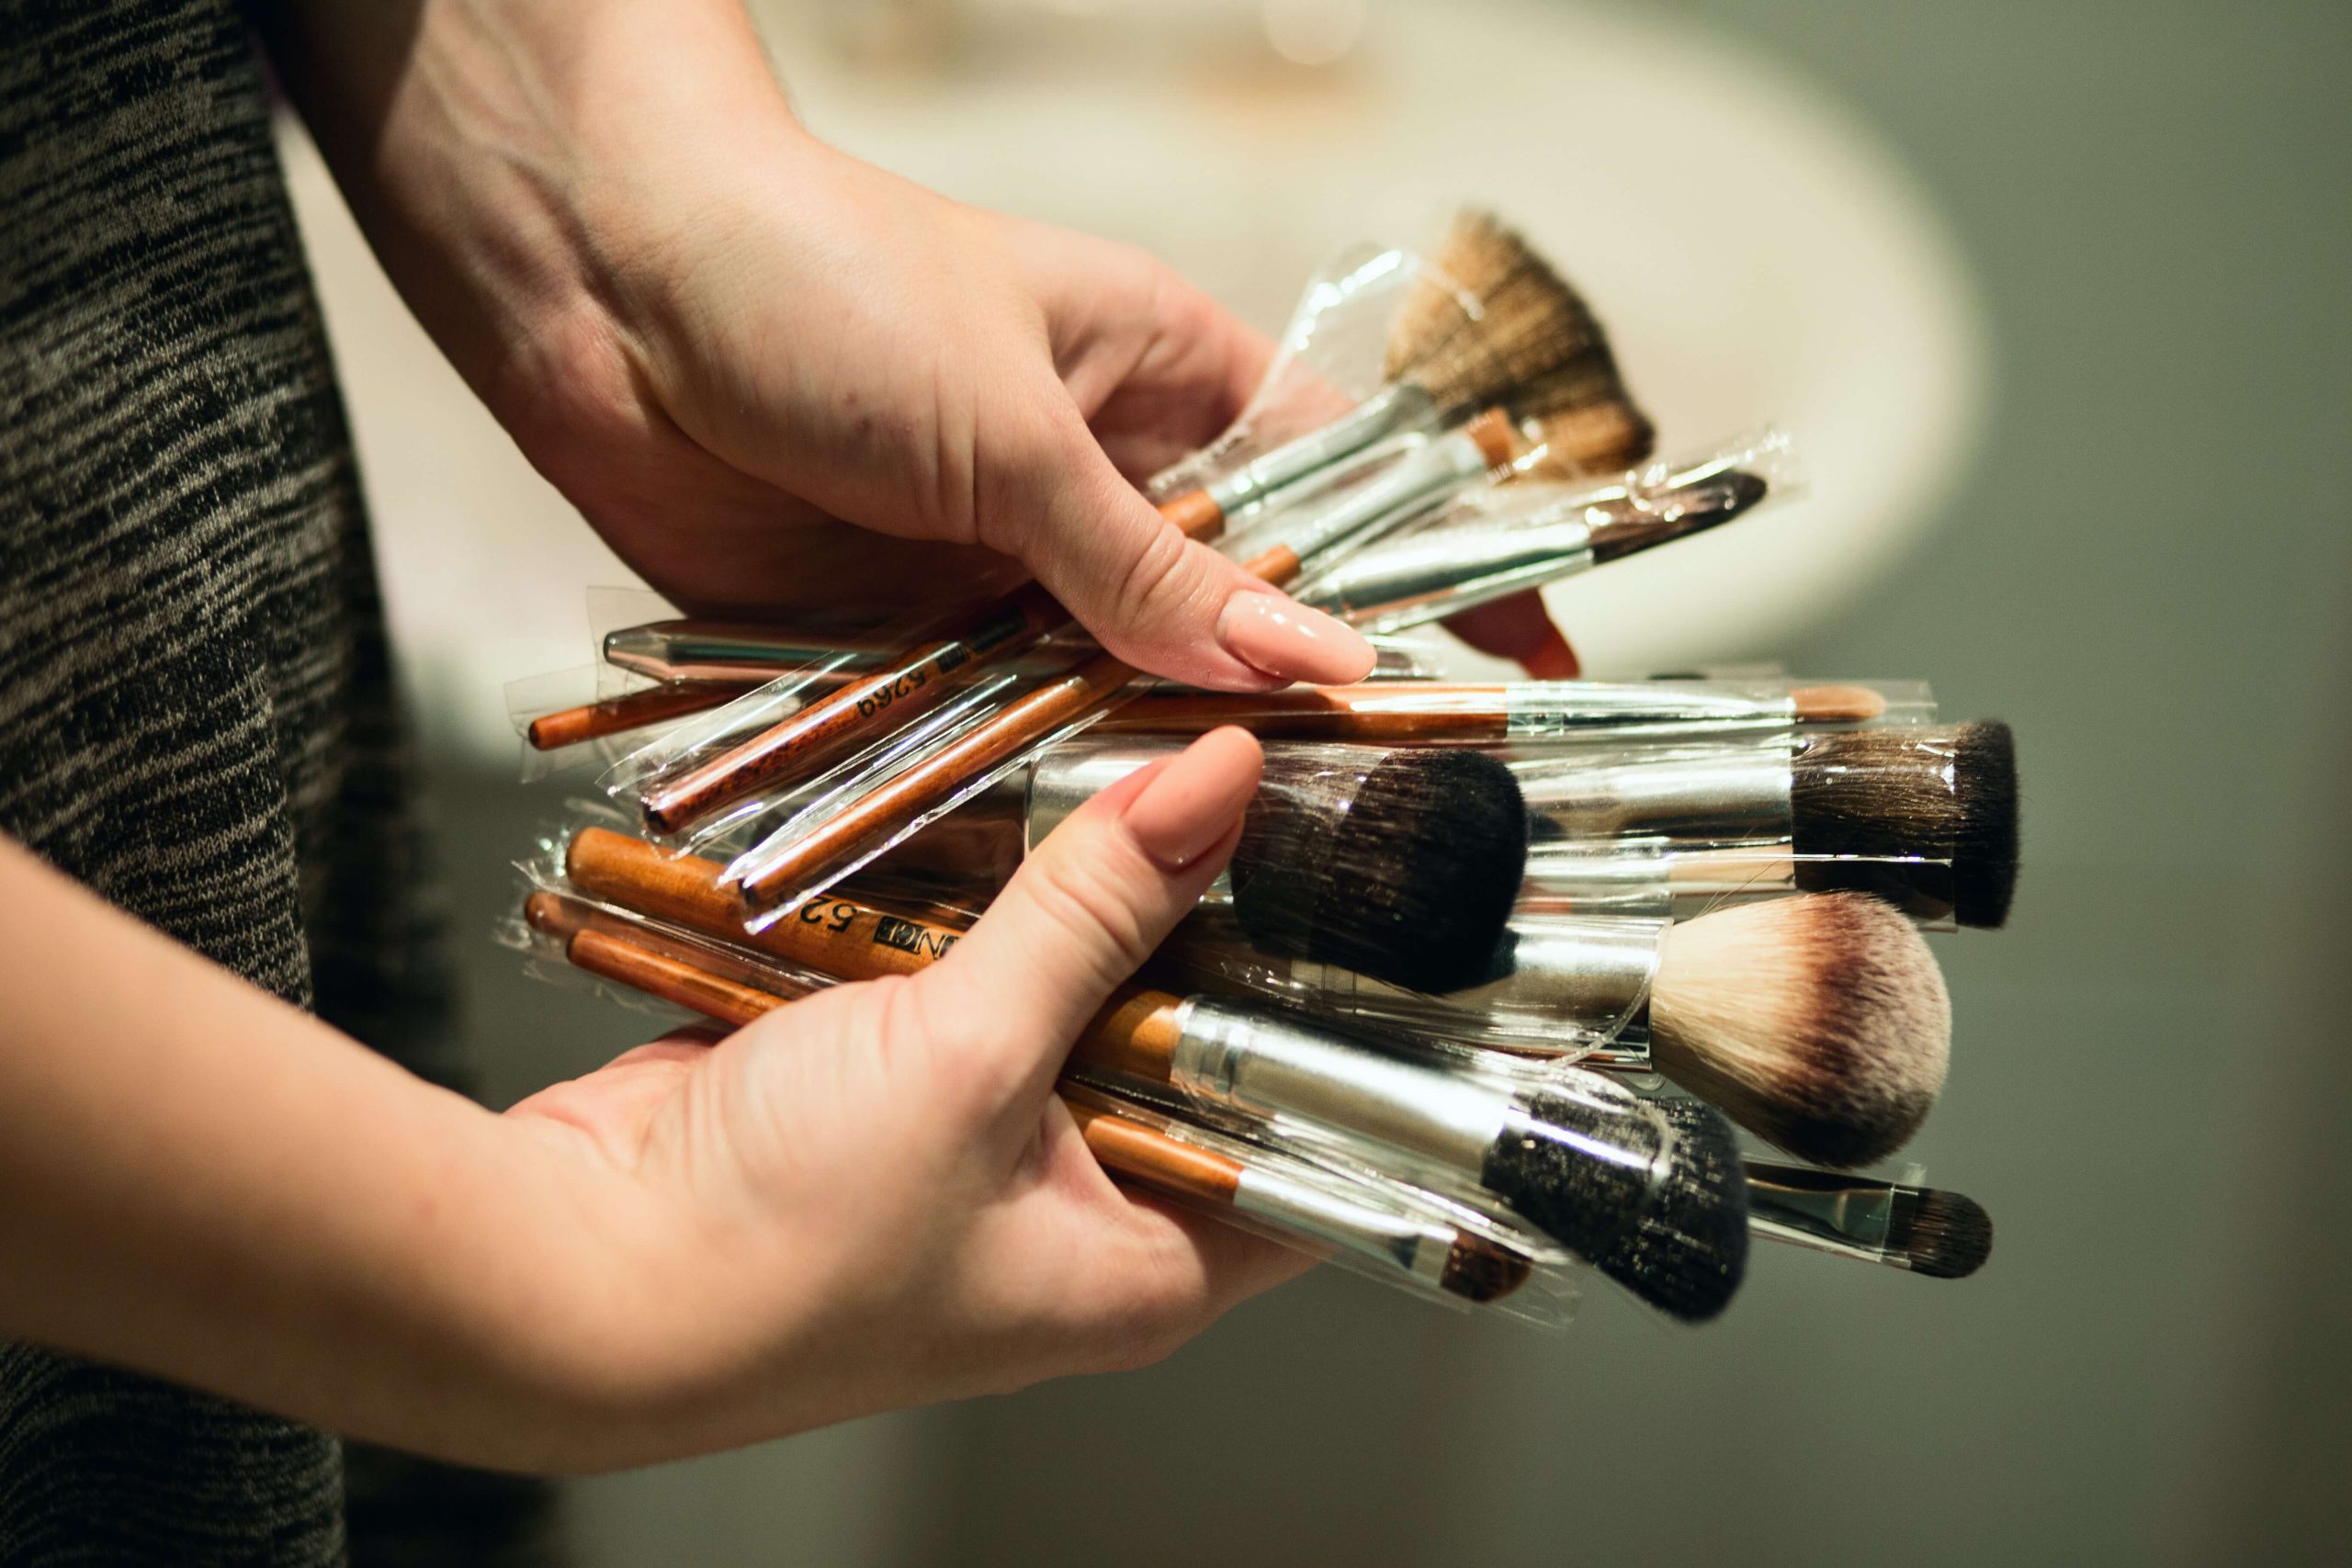 Guide to Makeup Brushes How to Select Makeup Brushes Like A Pro! (3)